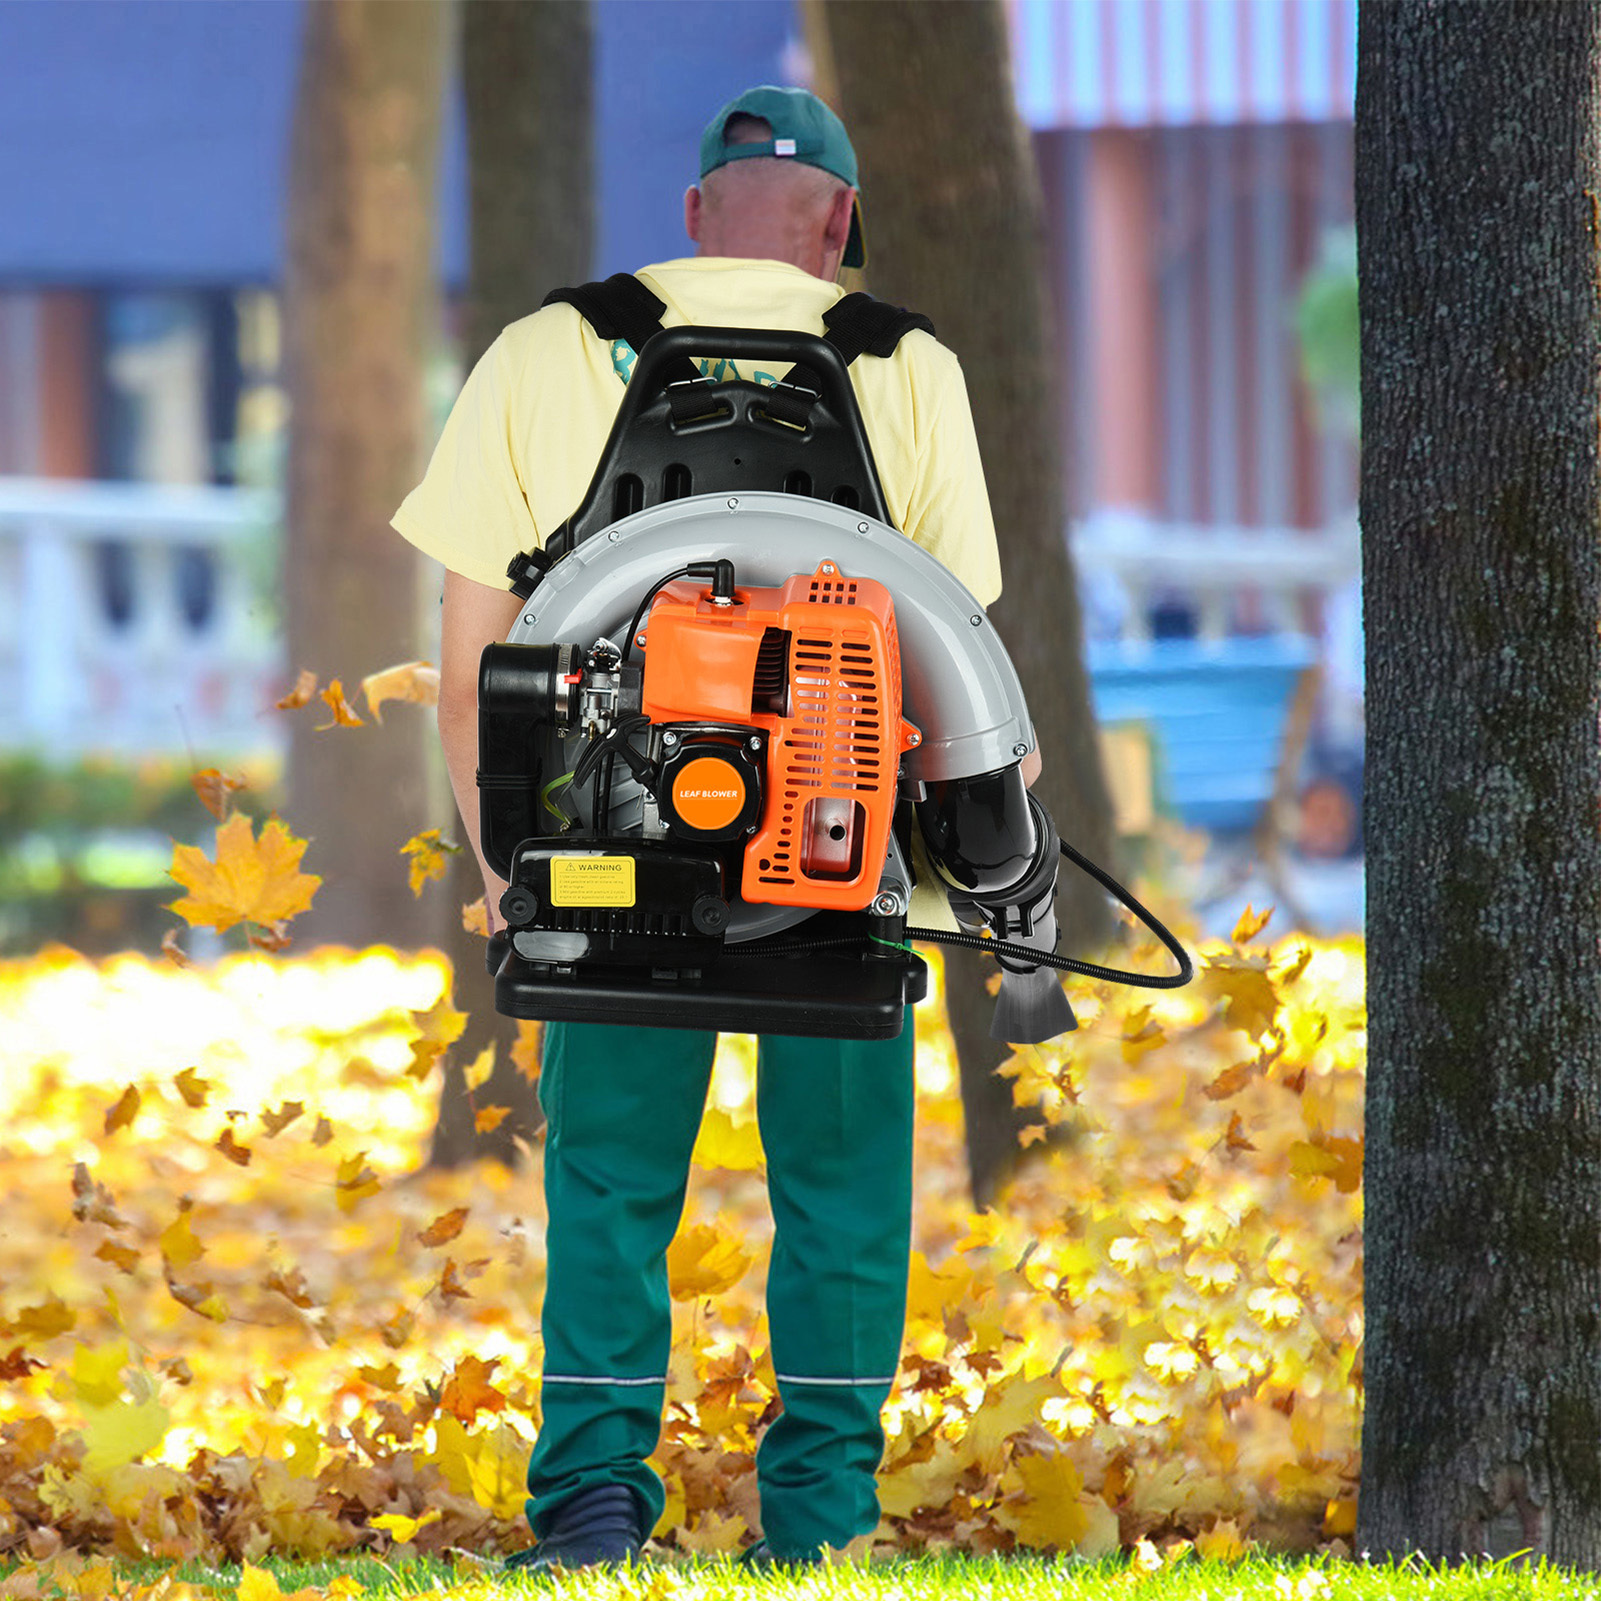 

1pc Professional Backpack Leaf Blower, 2-stroke Engine, Multi-purpose Outdoor Yard Snow And Leaf Blower, For Outdoor Stree Cleaning, 70x21x17in/180*45*54cm